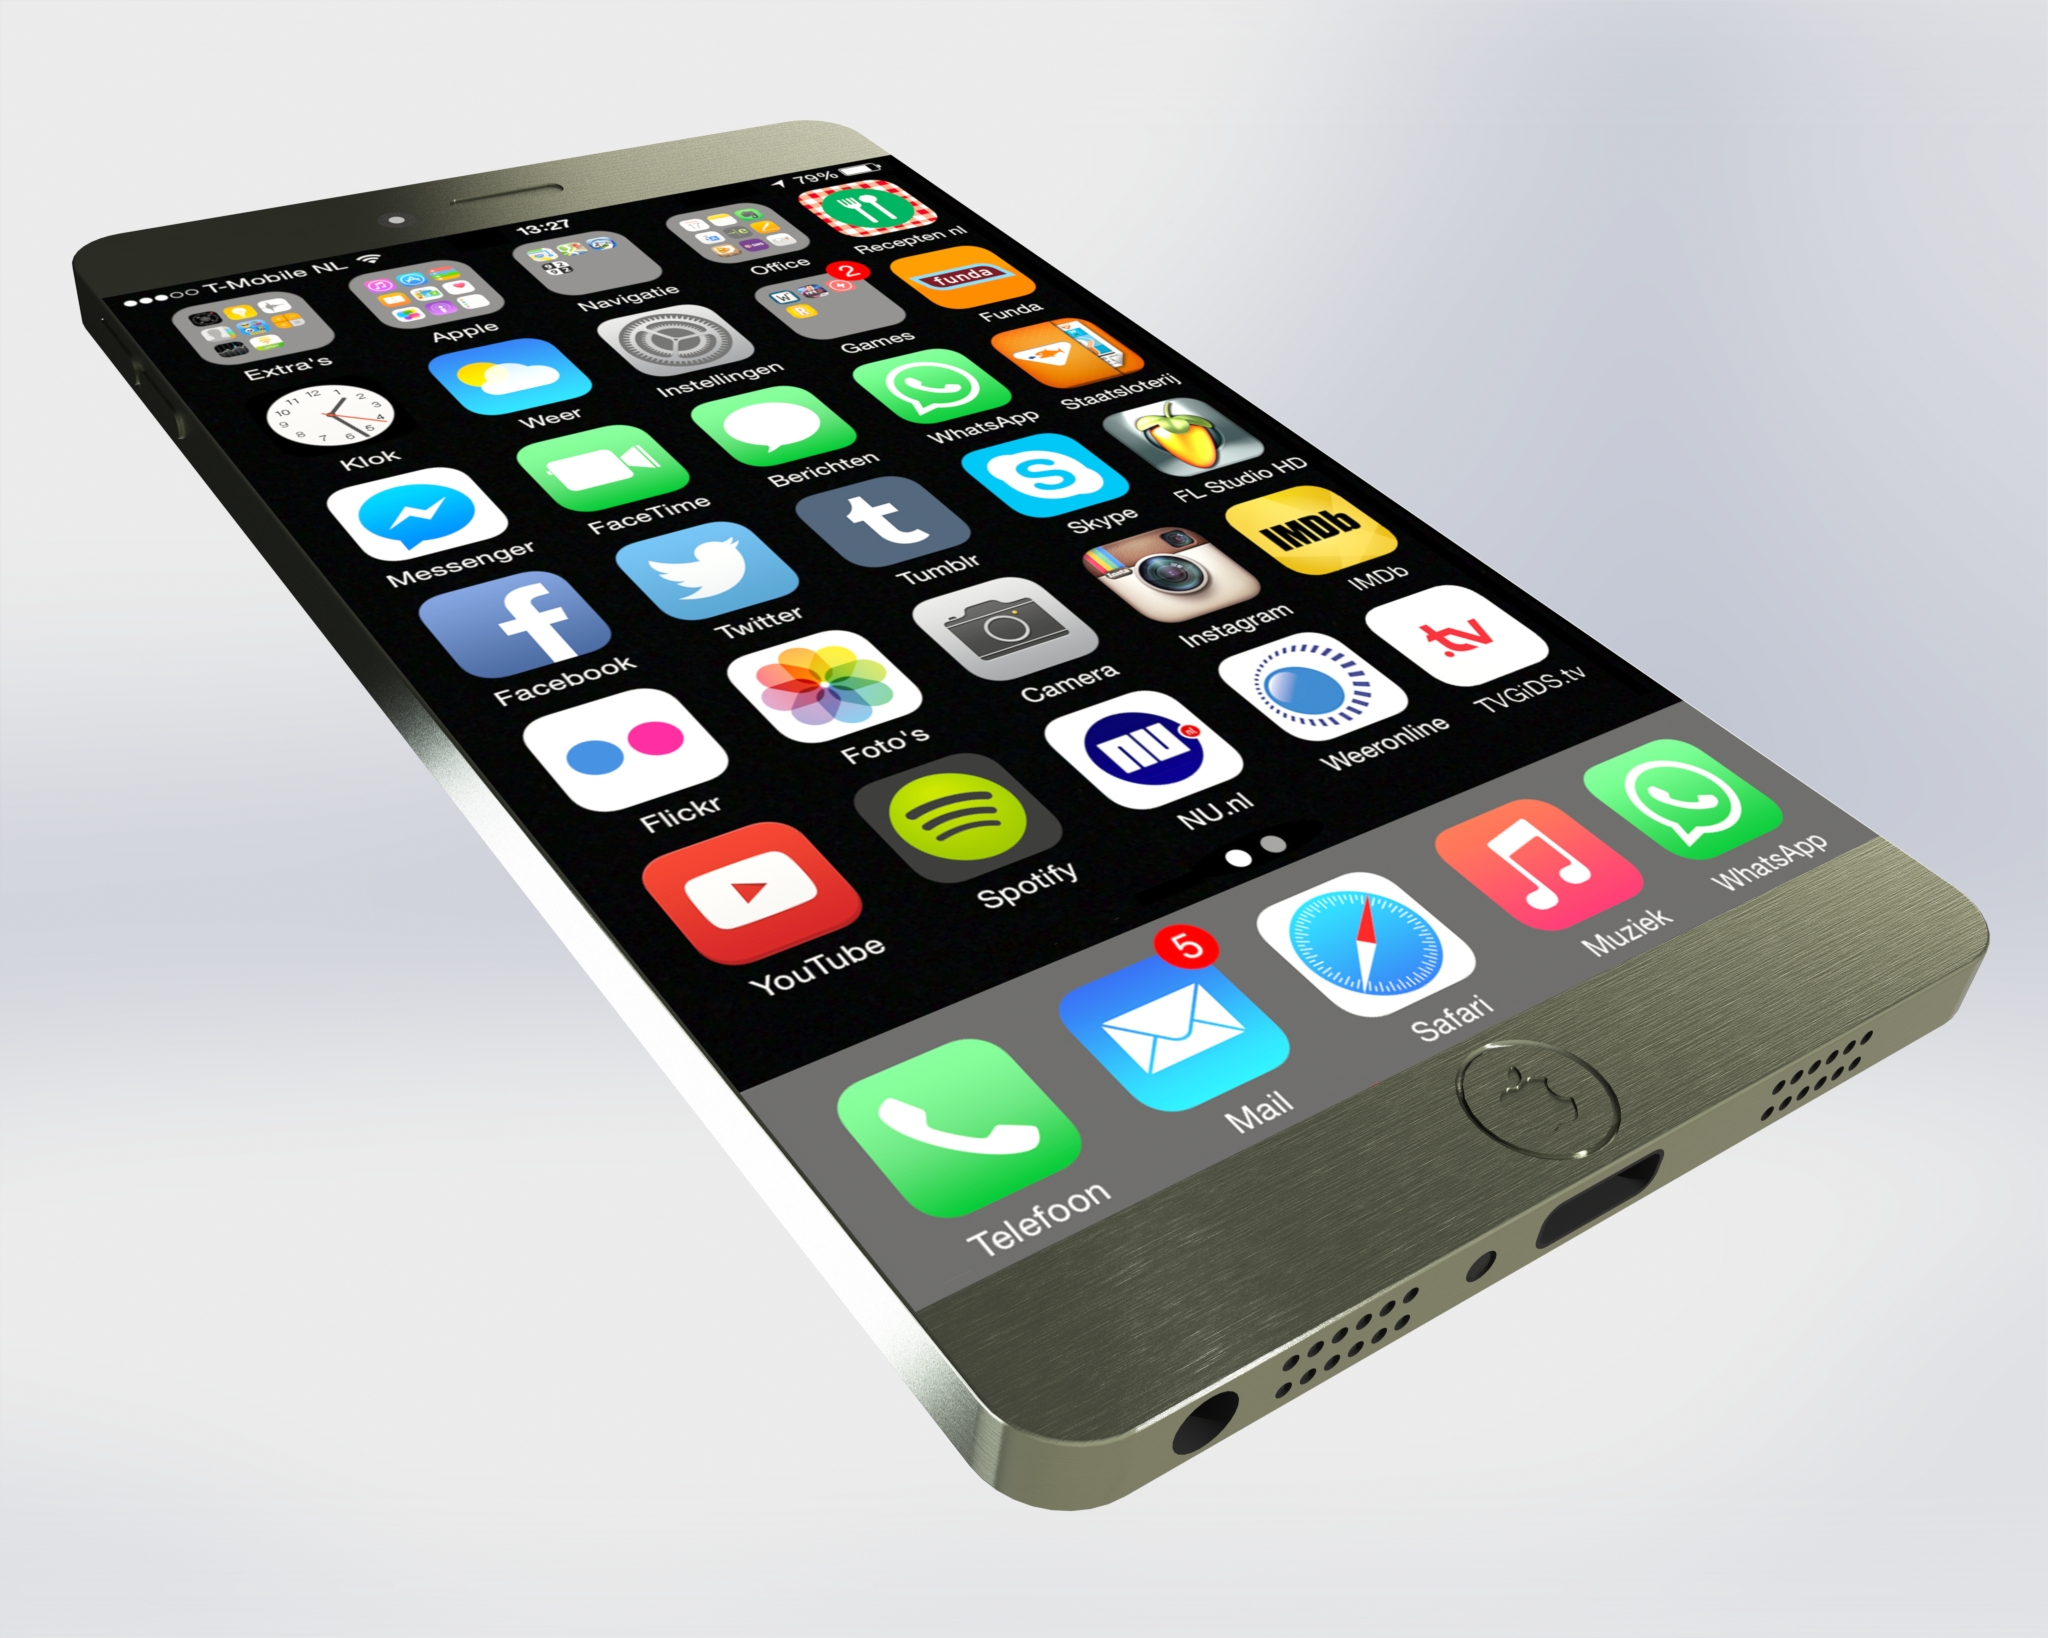 Apple In Mood Of Launching iPhone 7 Early